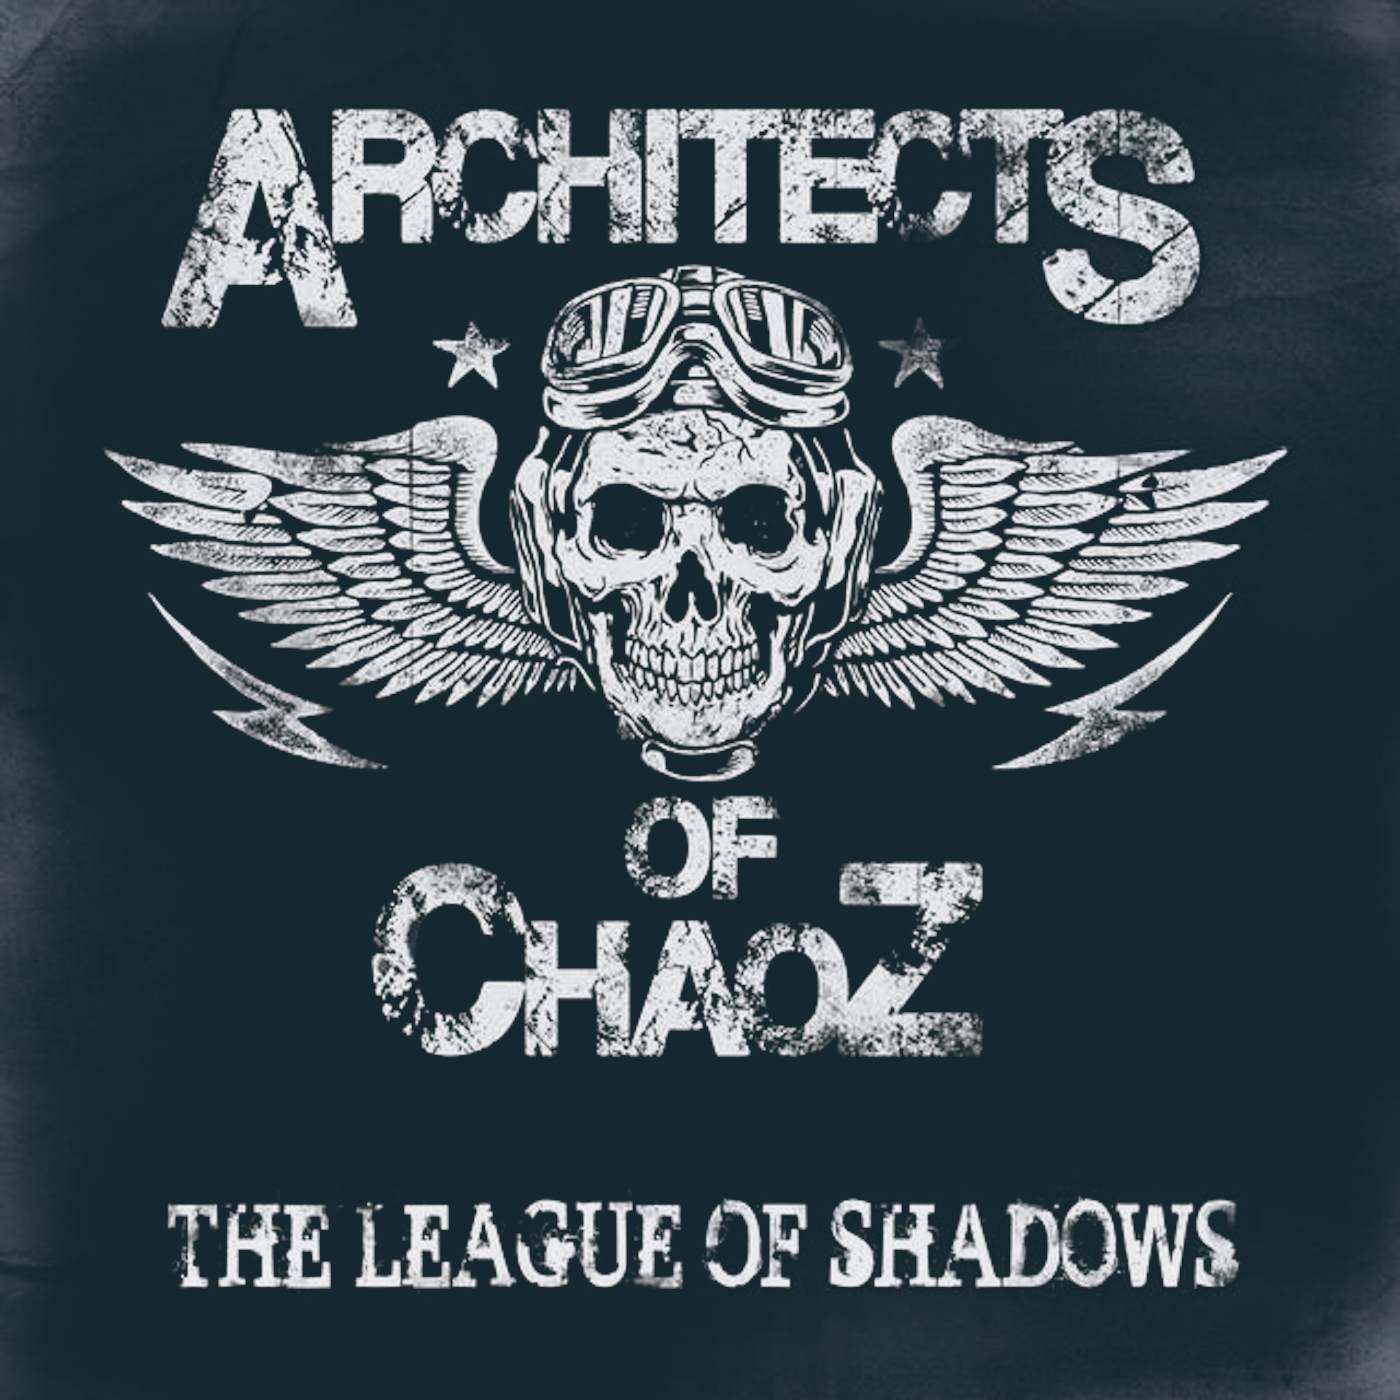 Architects of Chaoz